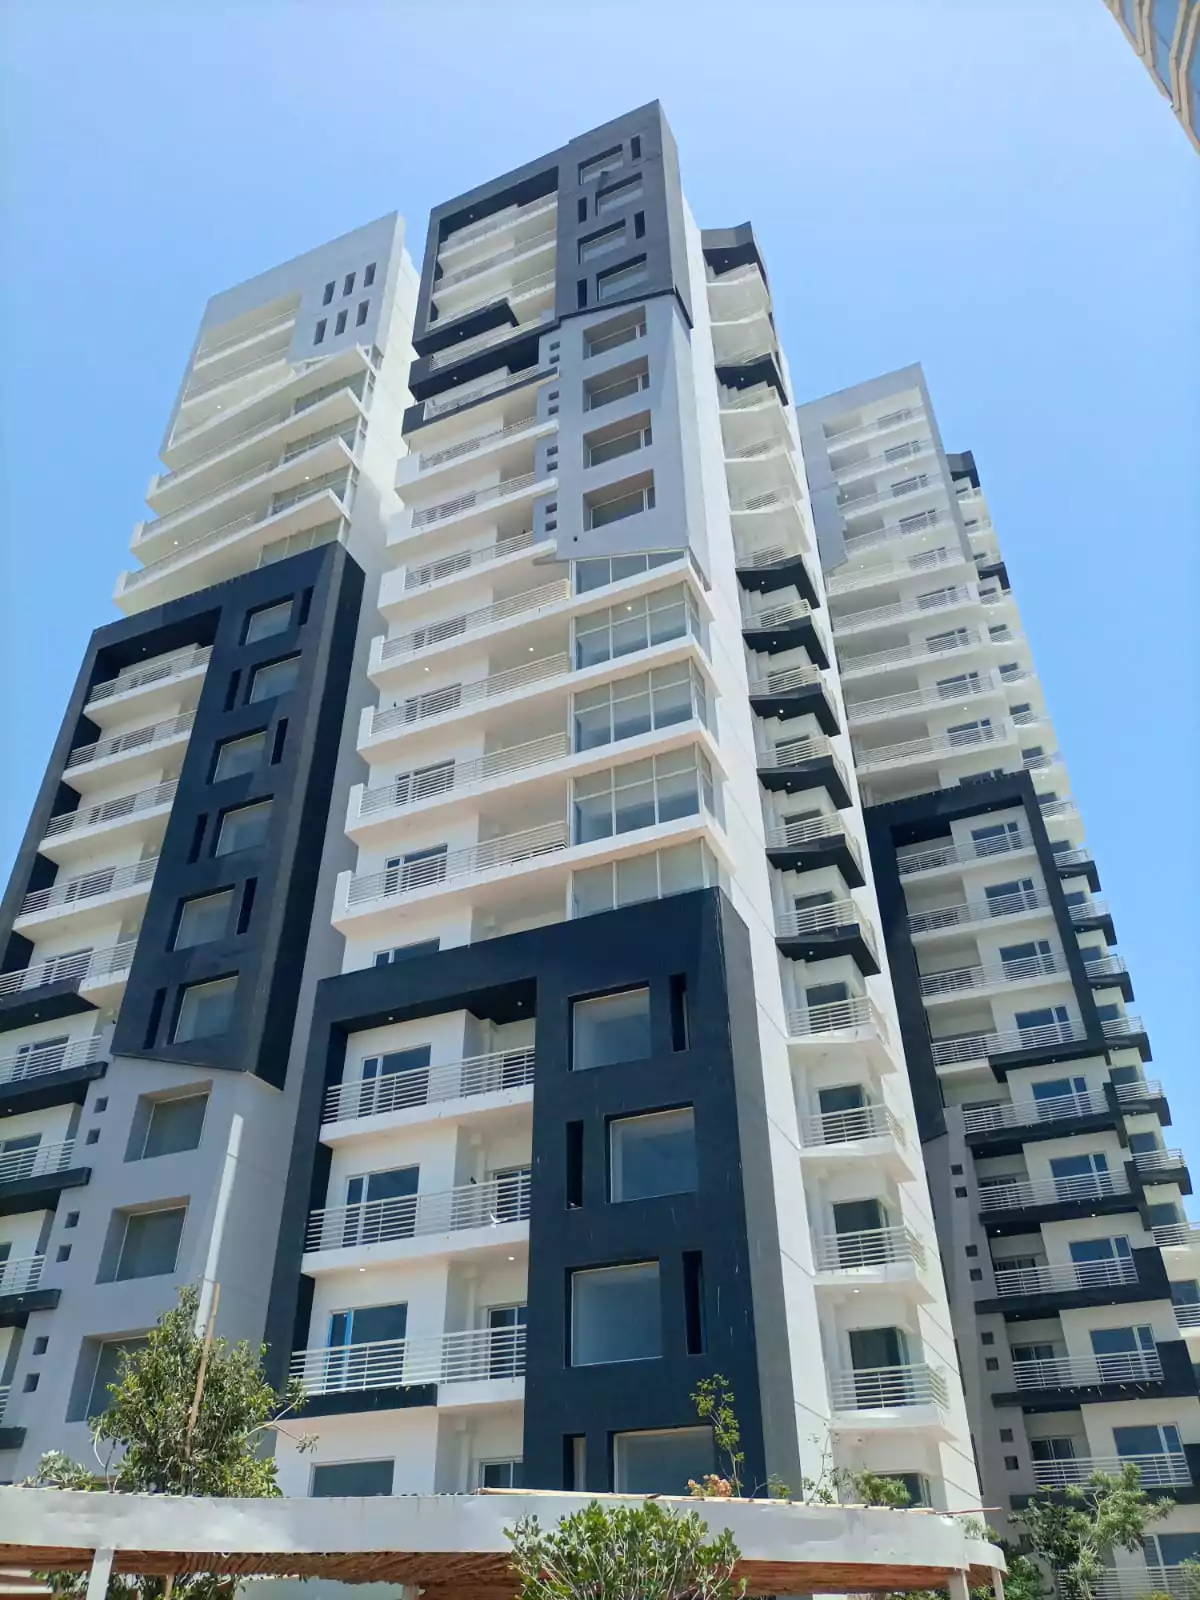 Dynasty tower clifton: luxurious 4-bedroom flat for sale